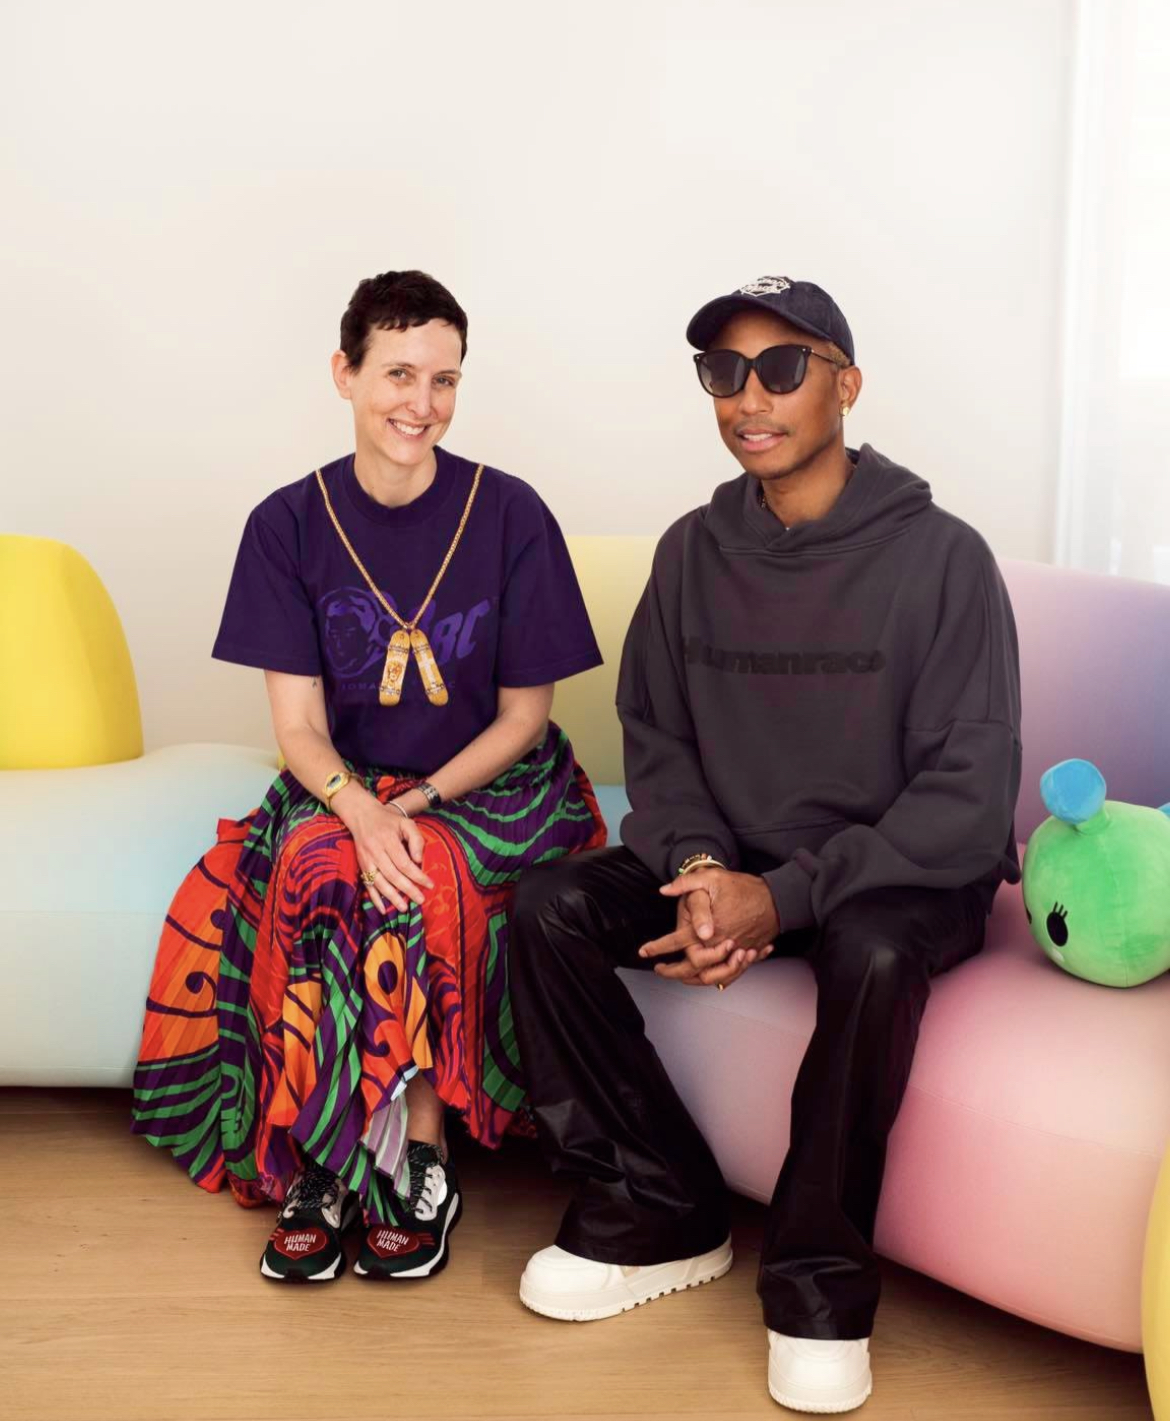 Pharrell Williams Just Phriends Exhibit and Auction